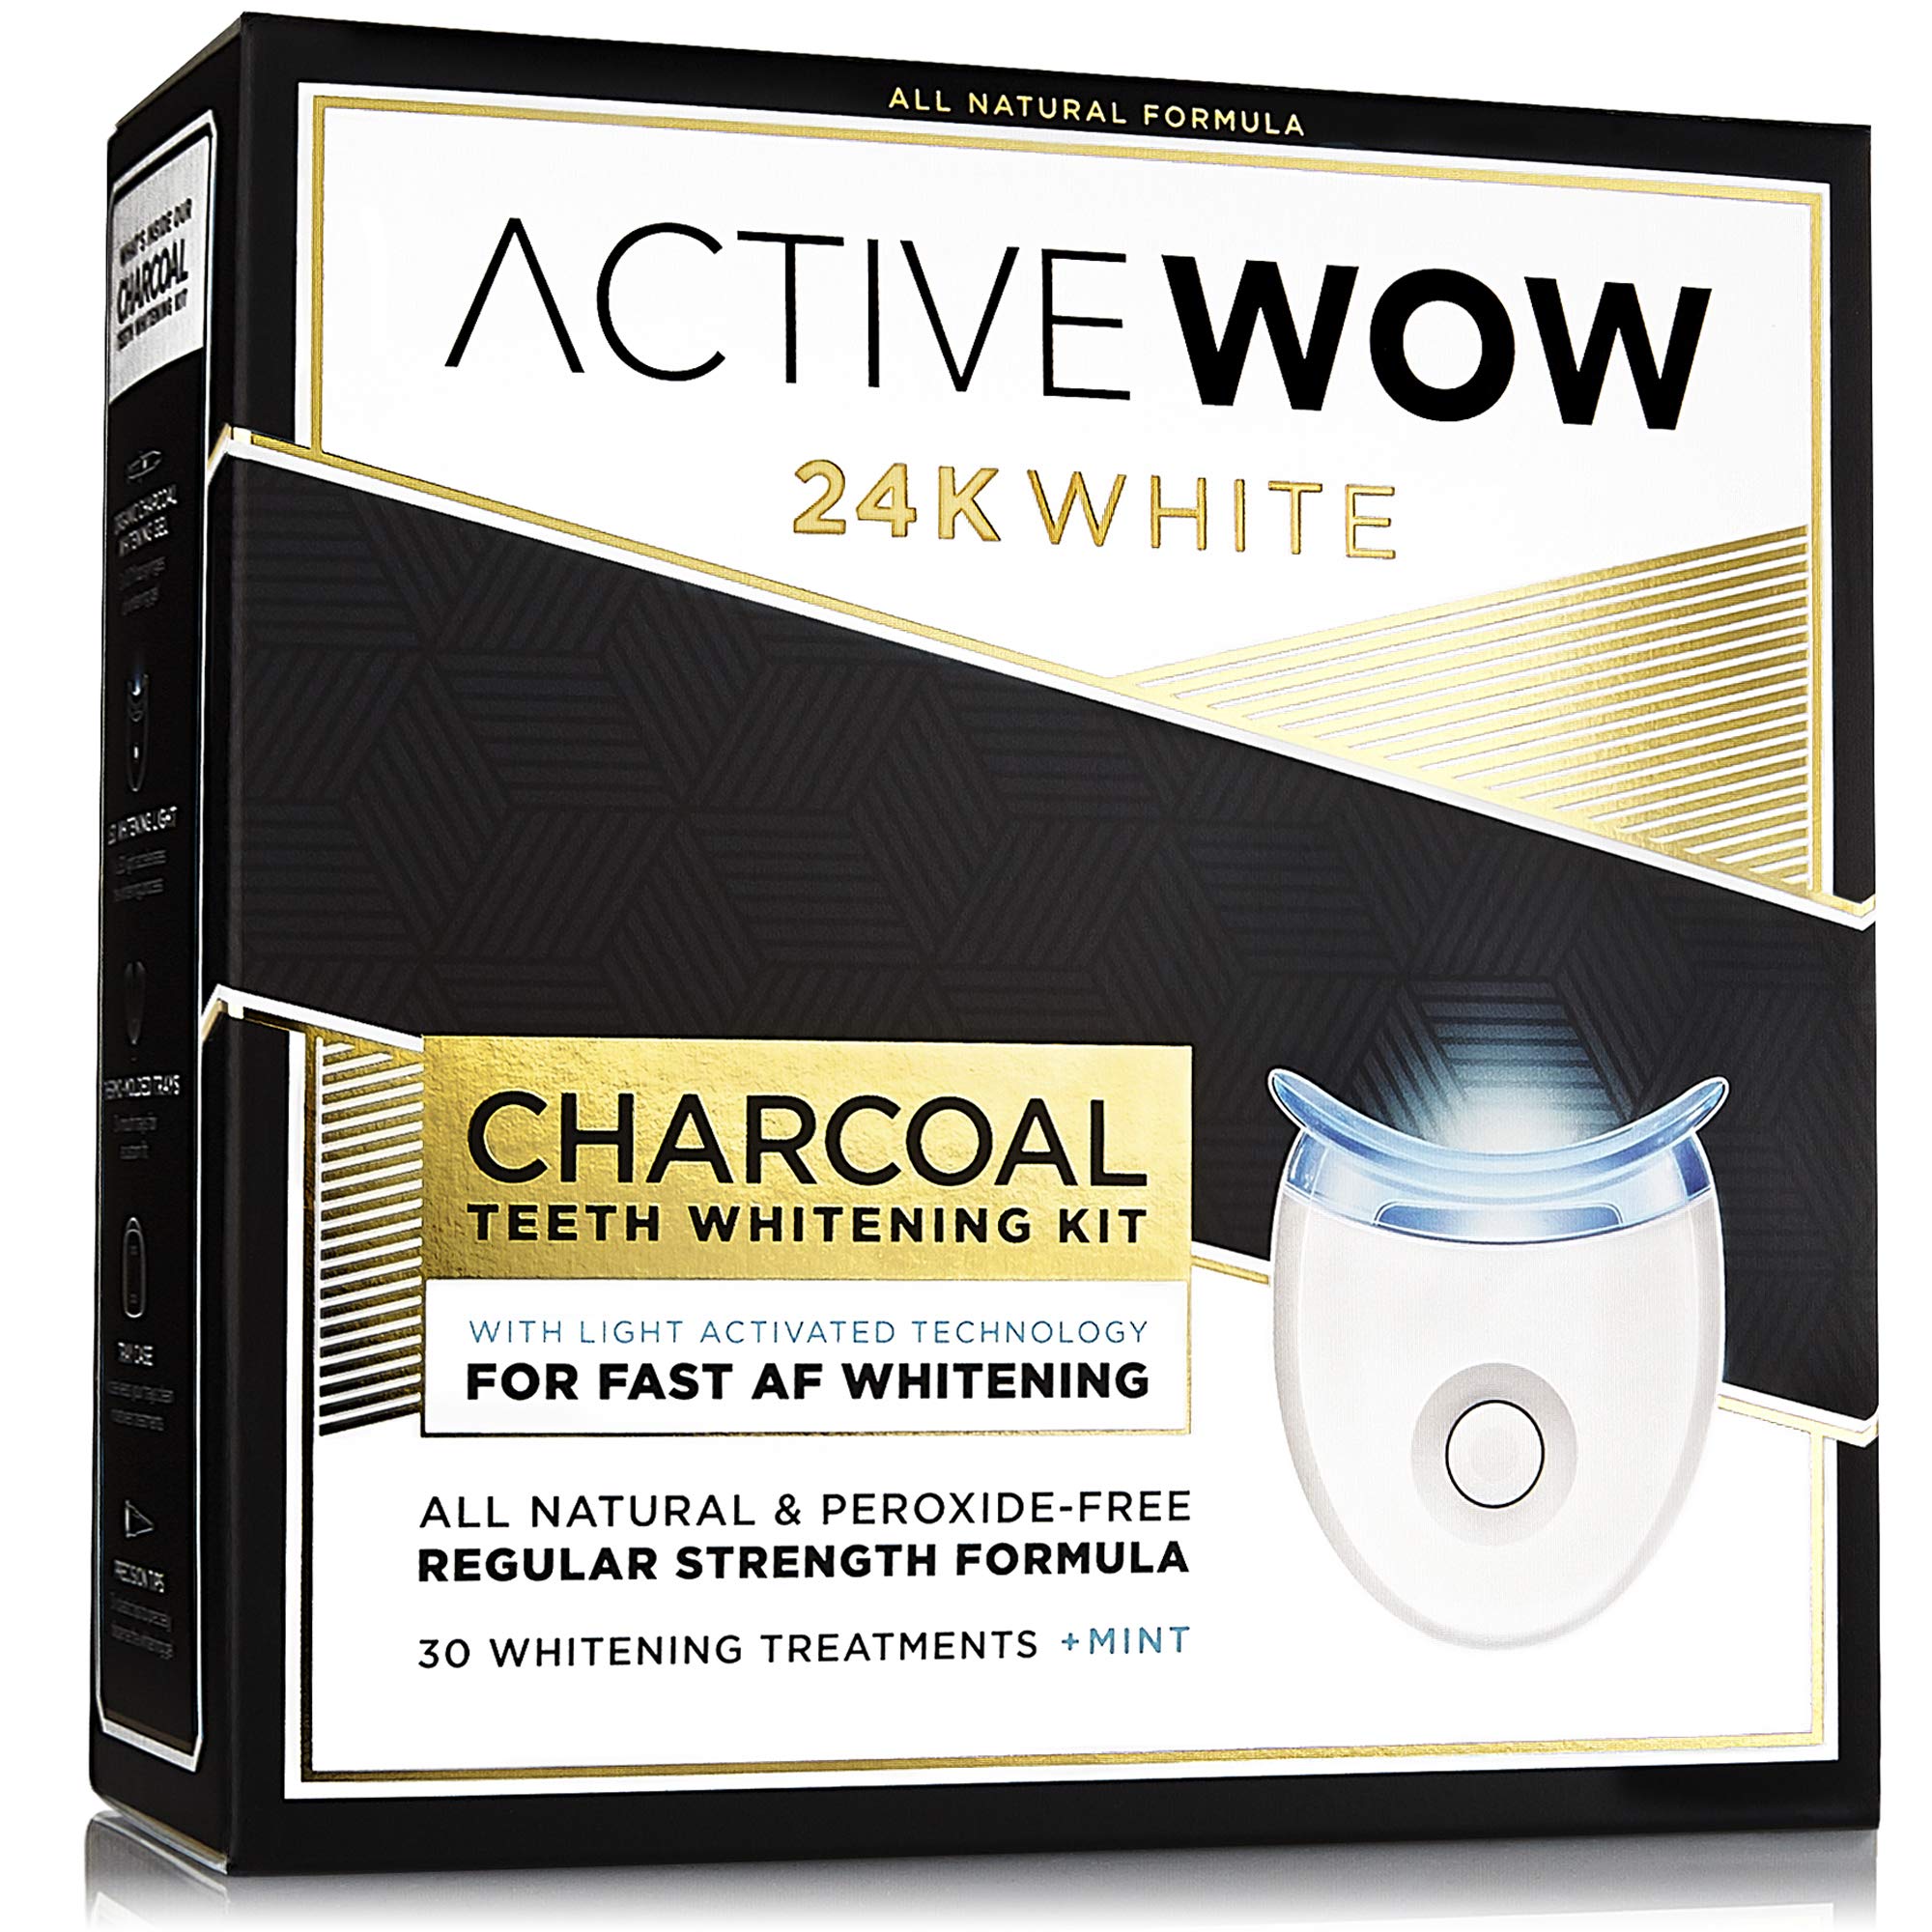 Active Wow 24k White Charcoal Teeth Whitening Kit - LED Teeth Whitening Kit, Teeth Whitening Light, All Natural Formula, Fluoride Free, Teeth Whitening Kit with LED Light - Mint Flavor, 30 Treatments